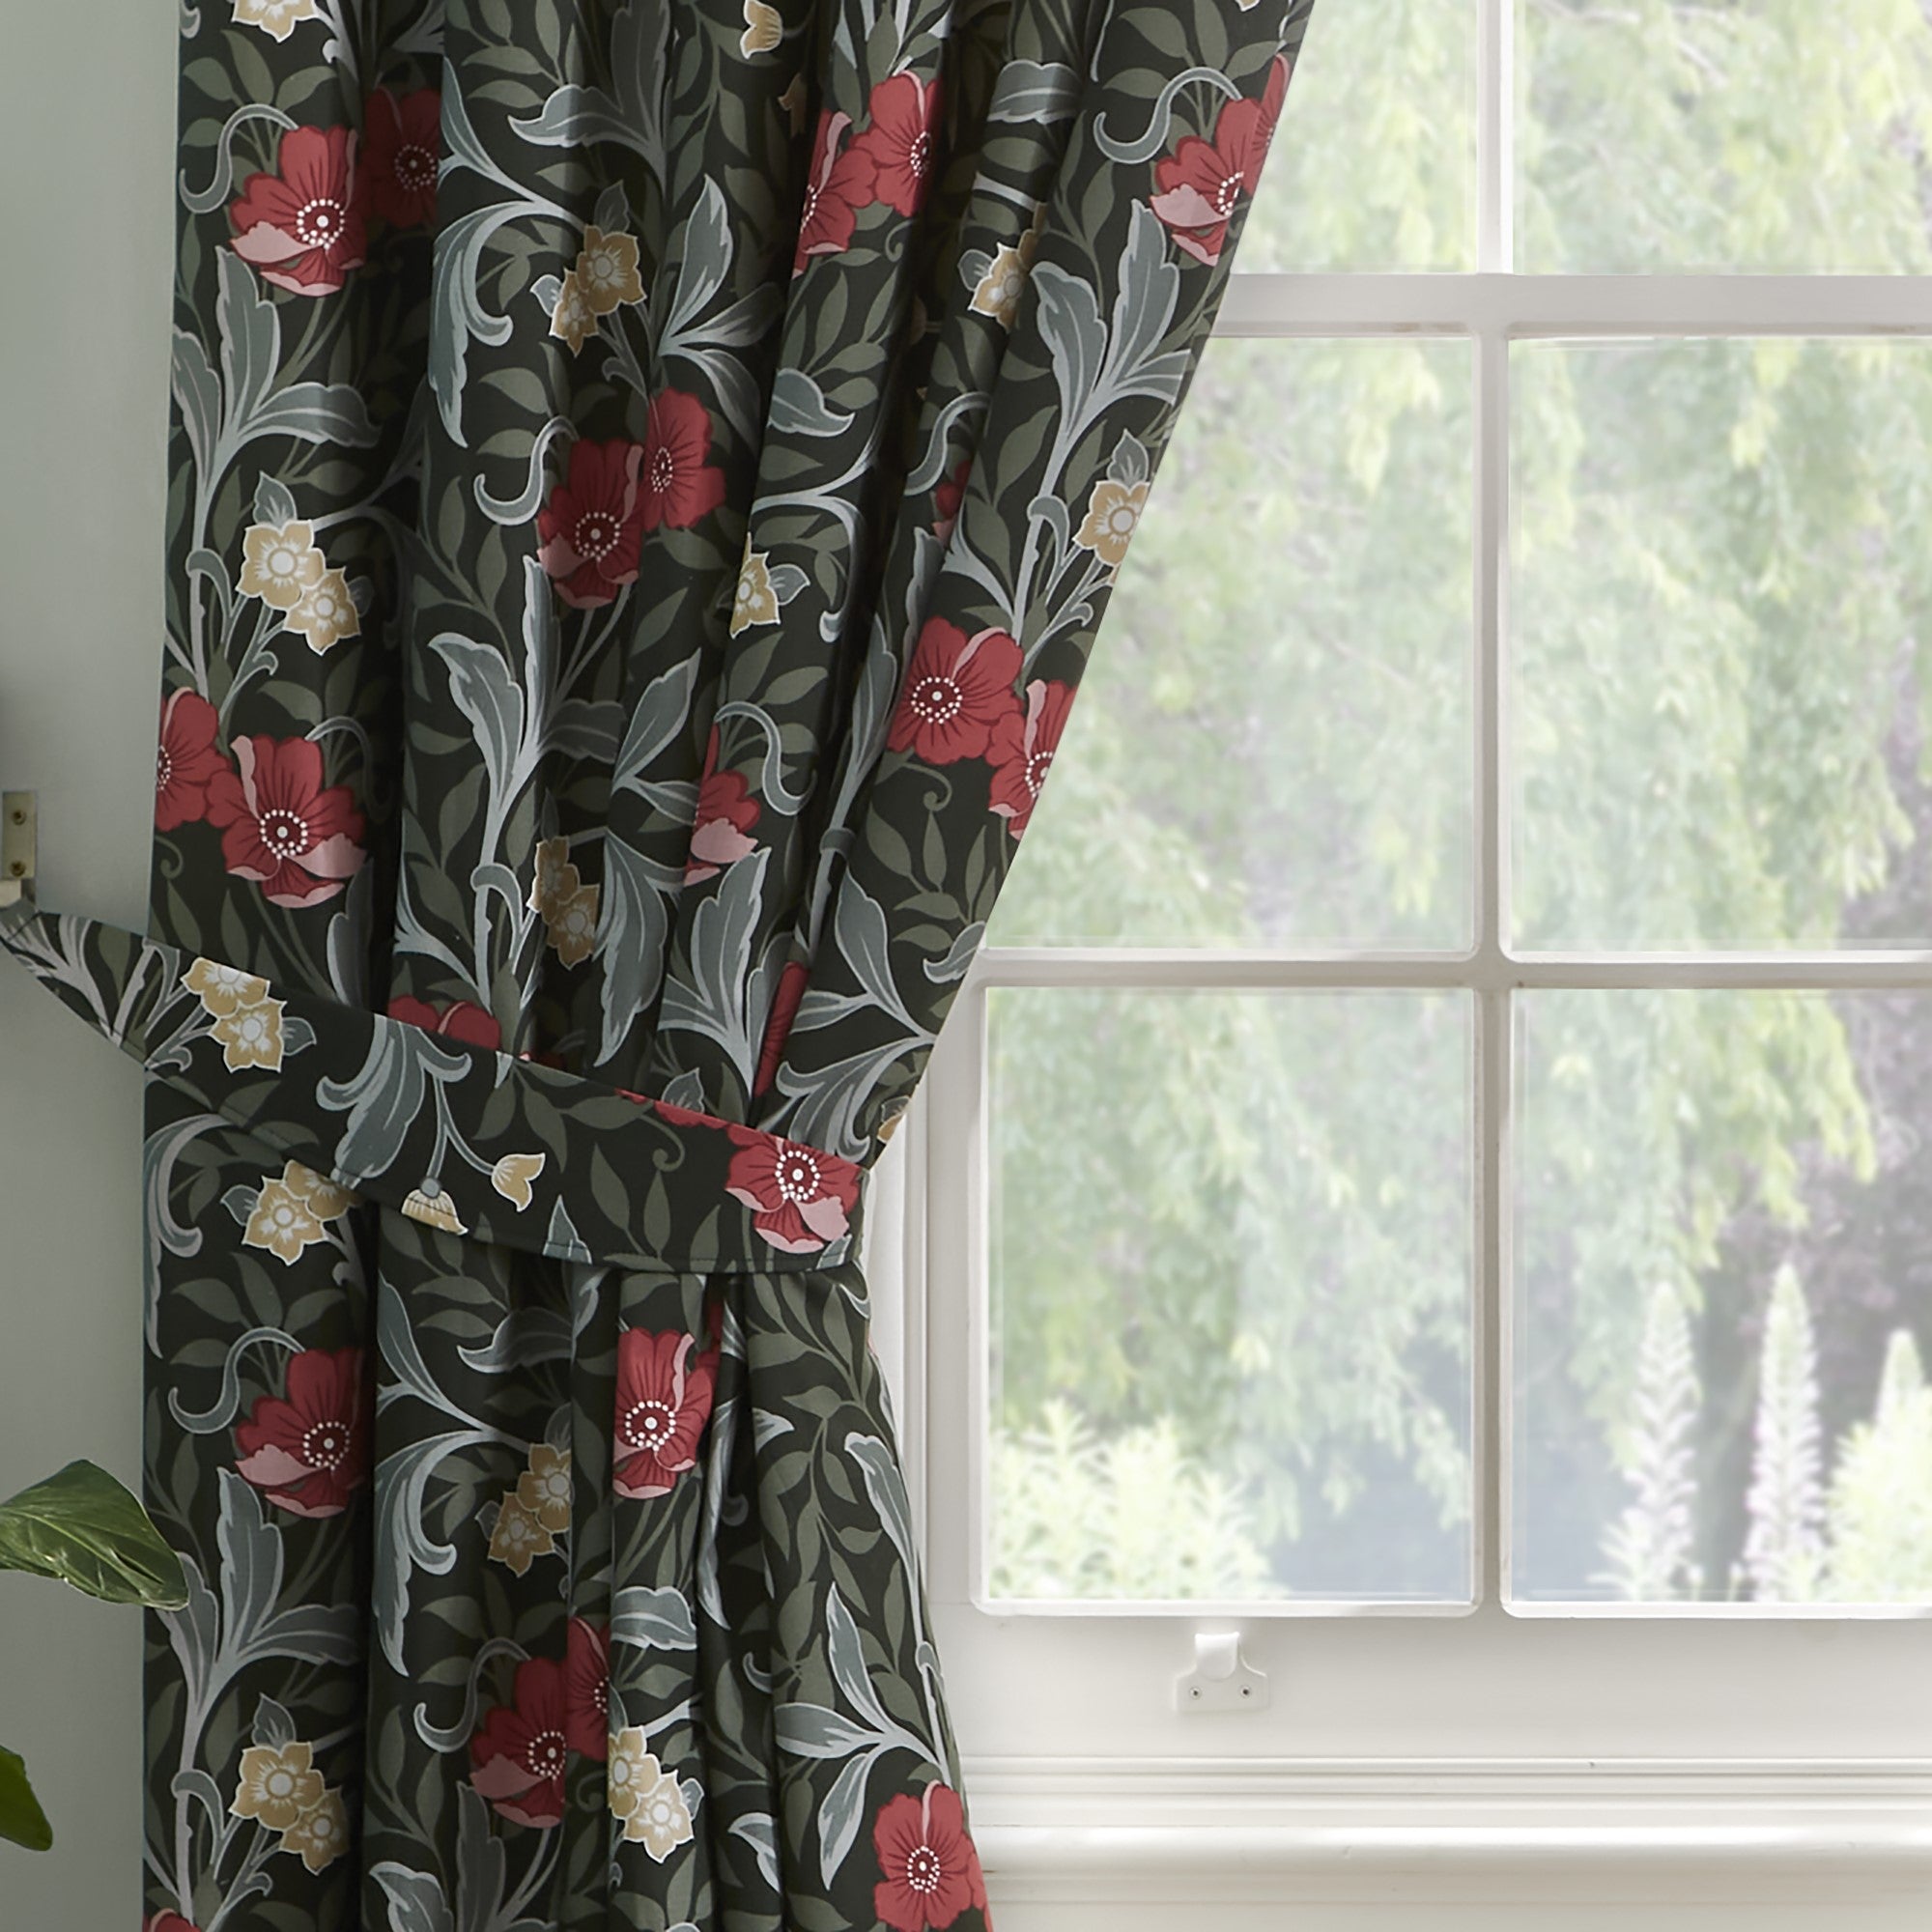 Pair of Pencil Pleat Curtains With Tie-Backs Sandringham by D&D in Green